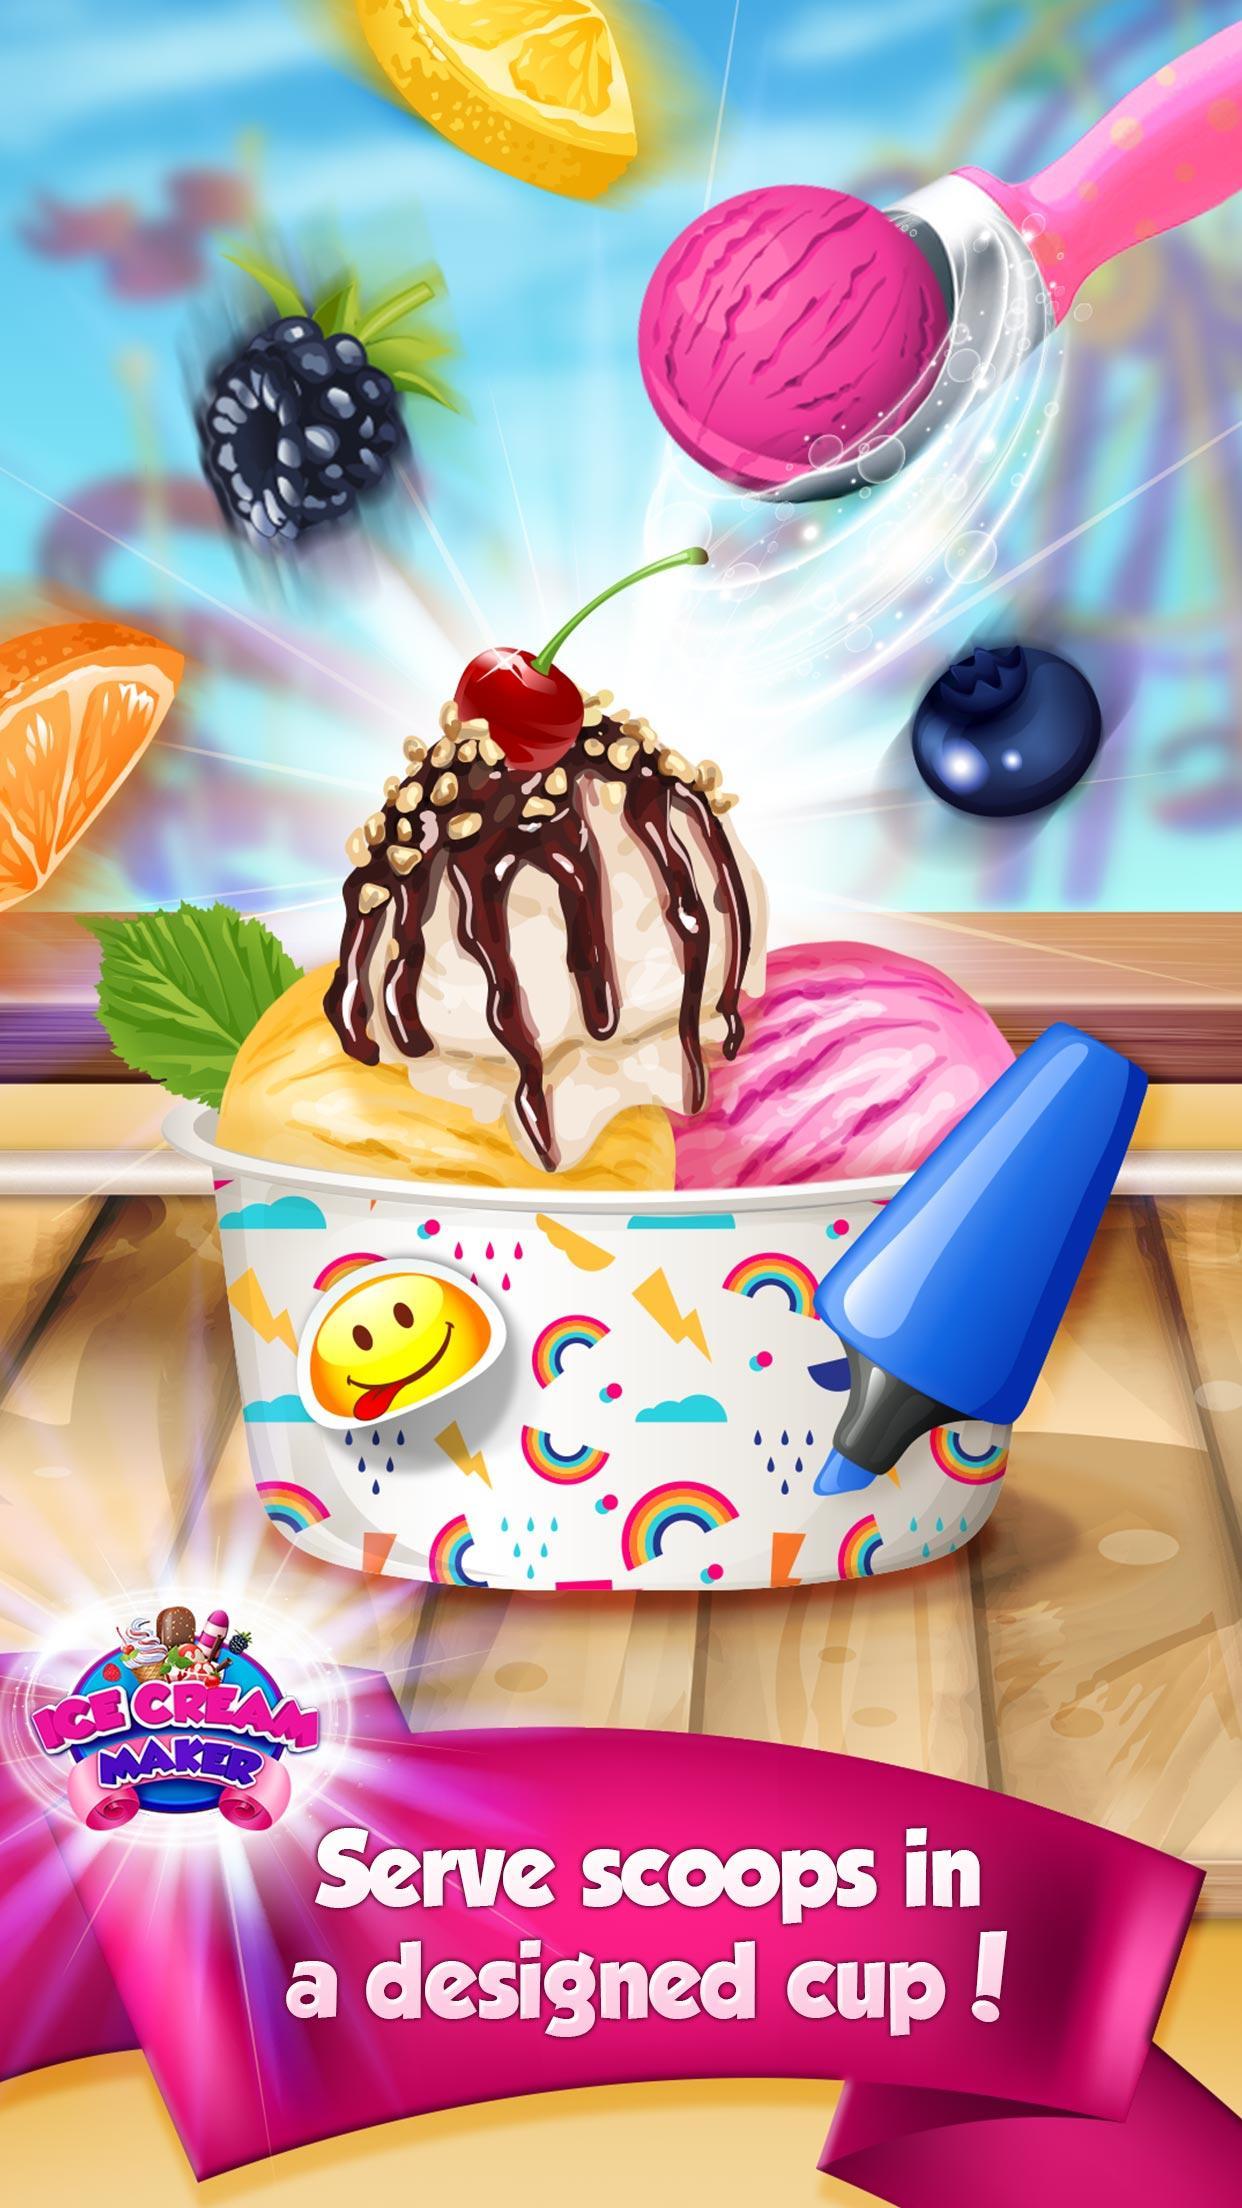 ice cream and cake games for windows instal